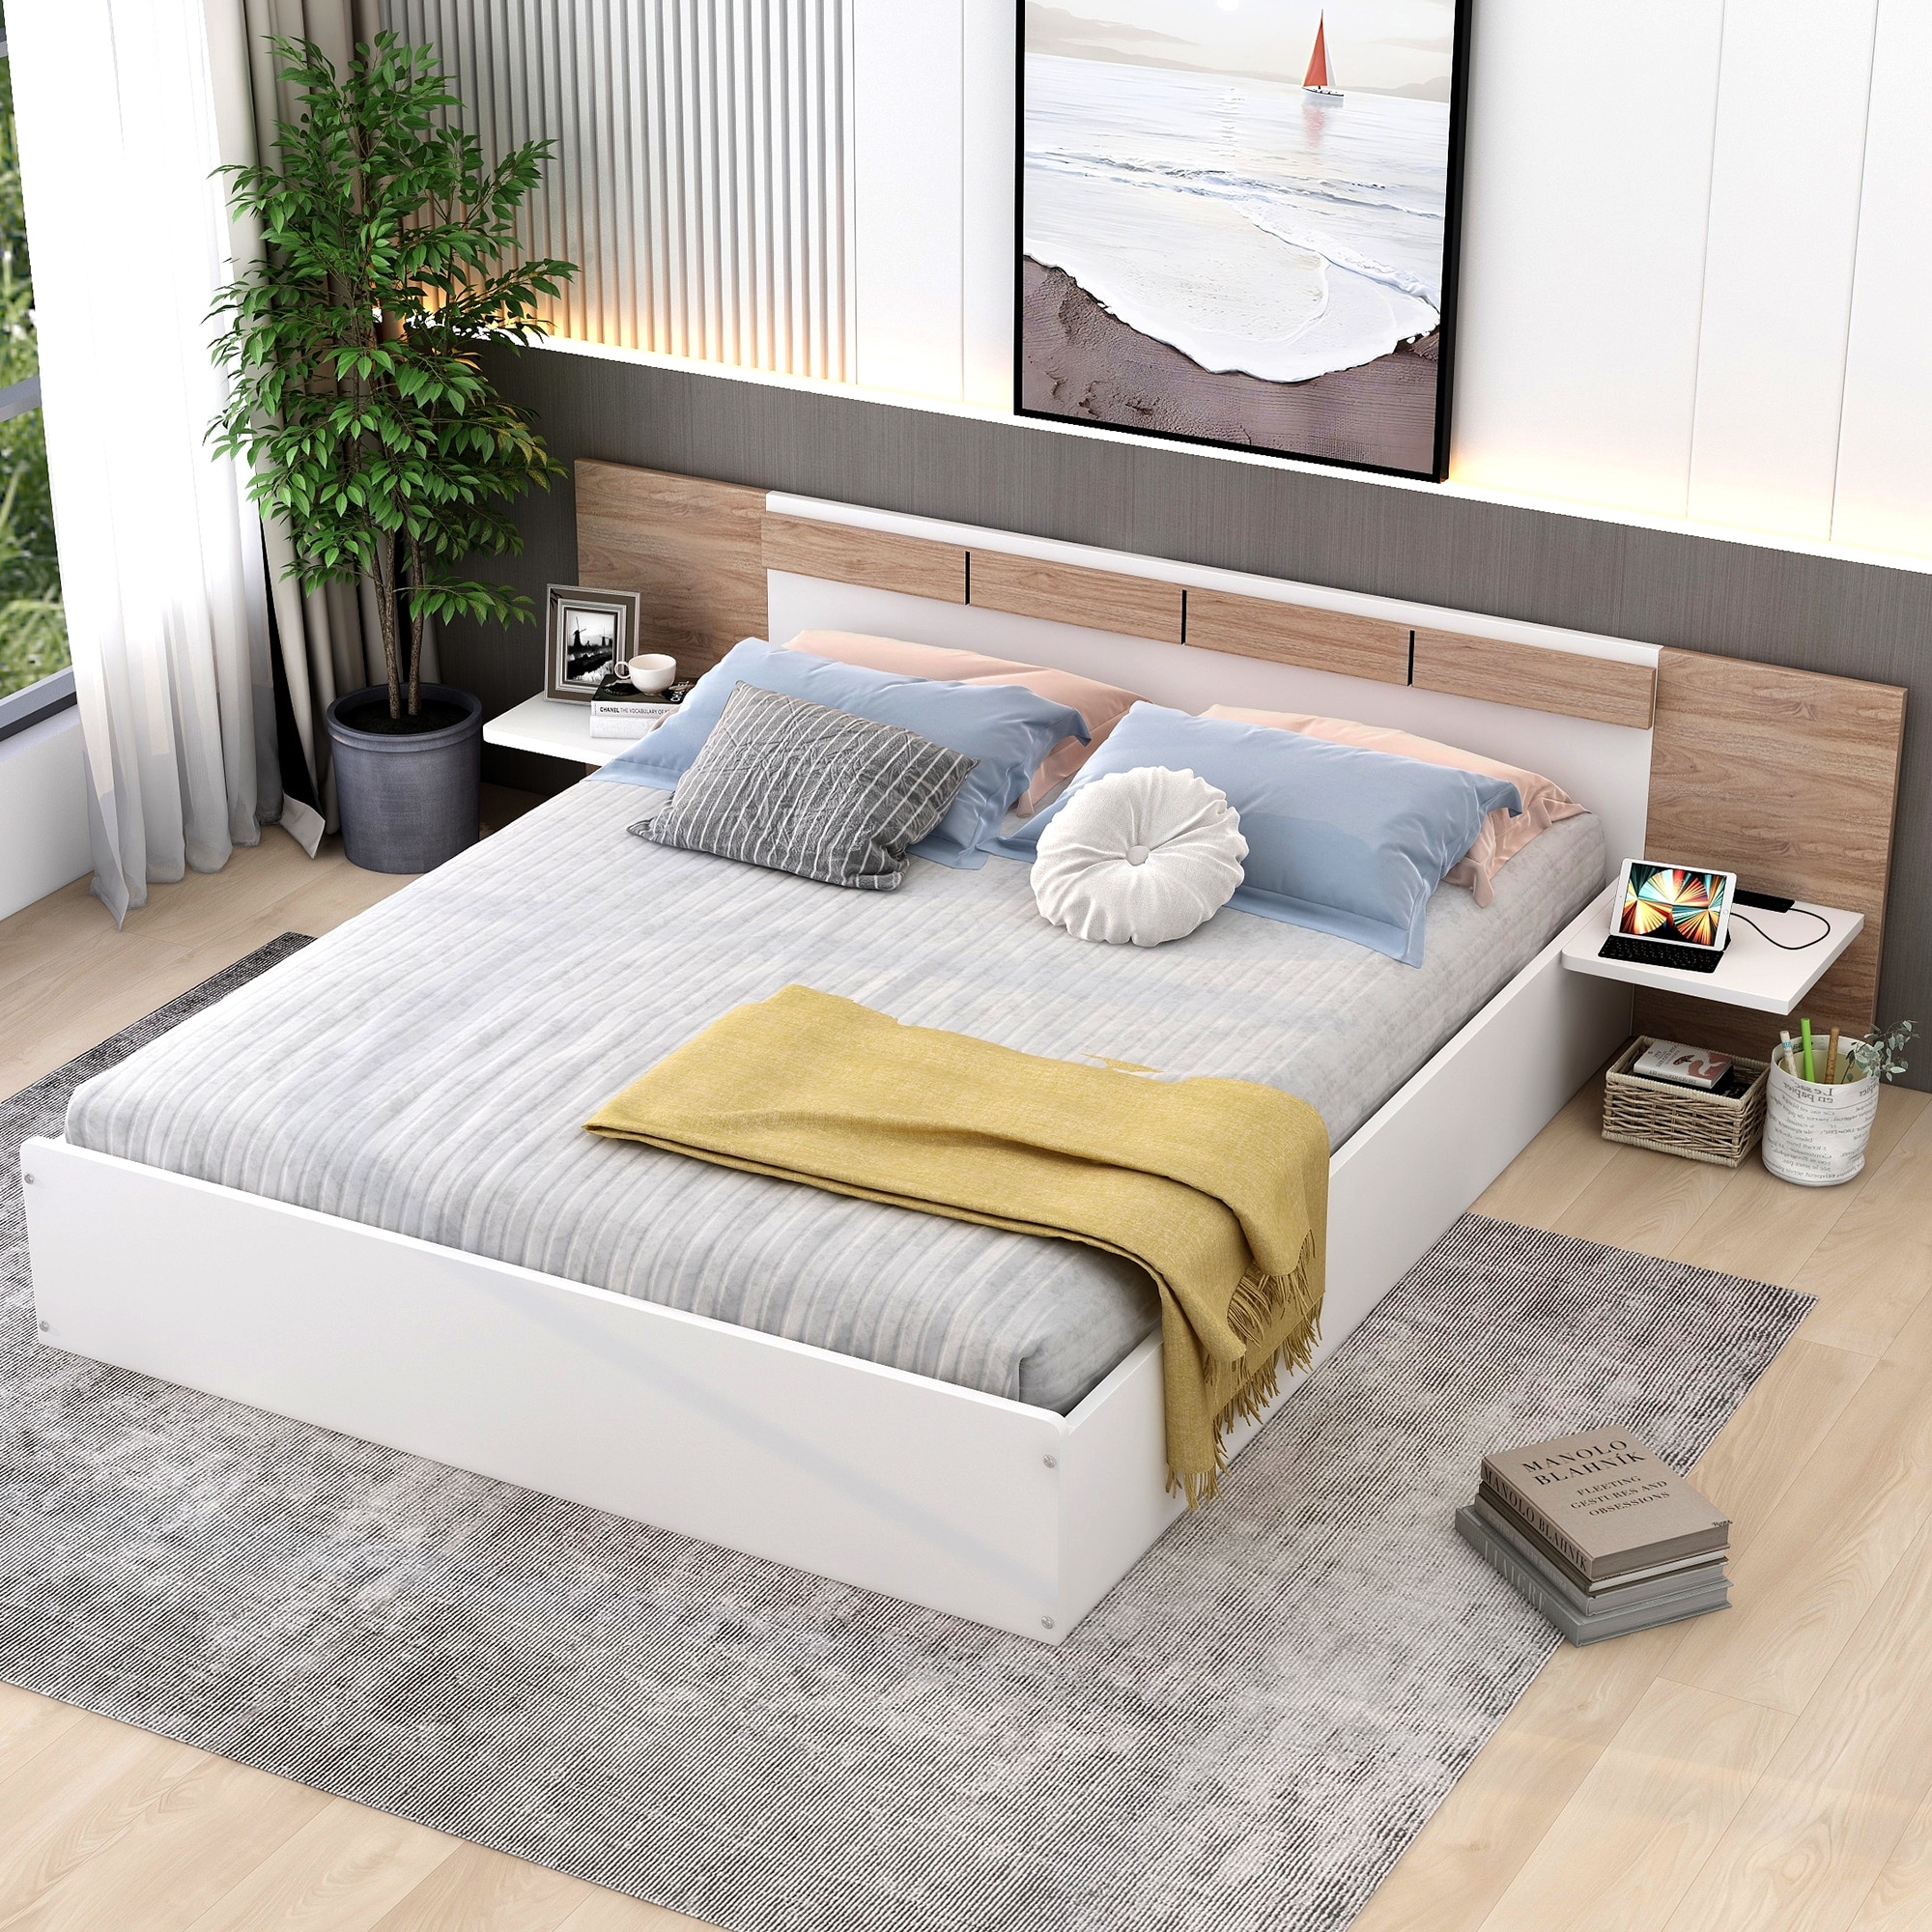 Queen Size Platform Bed With Headboard  Storage Shelves  Usb Ports And Sockets  Wood Queen Bed Frame  No Box Spring Needed